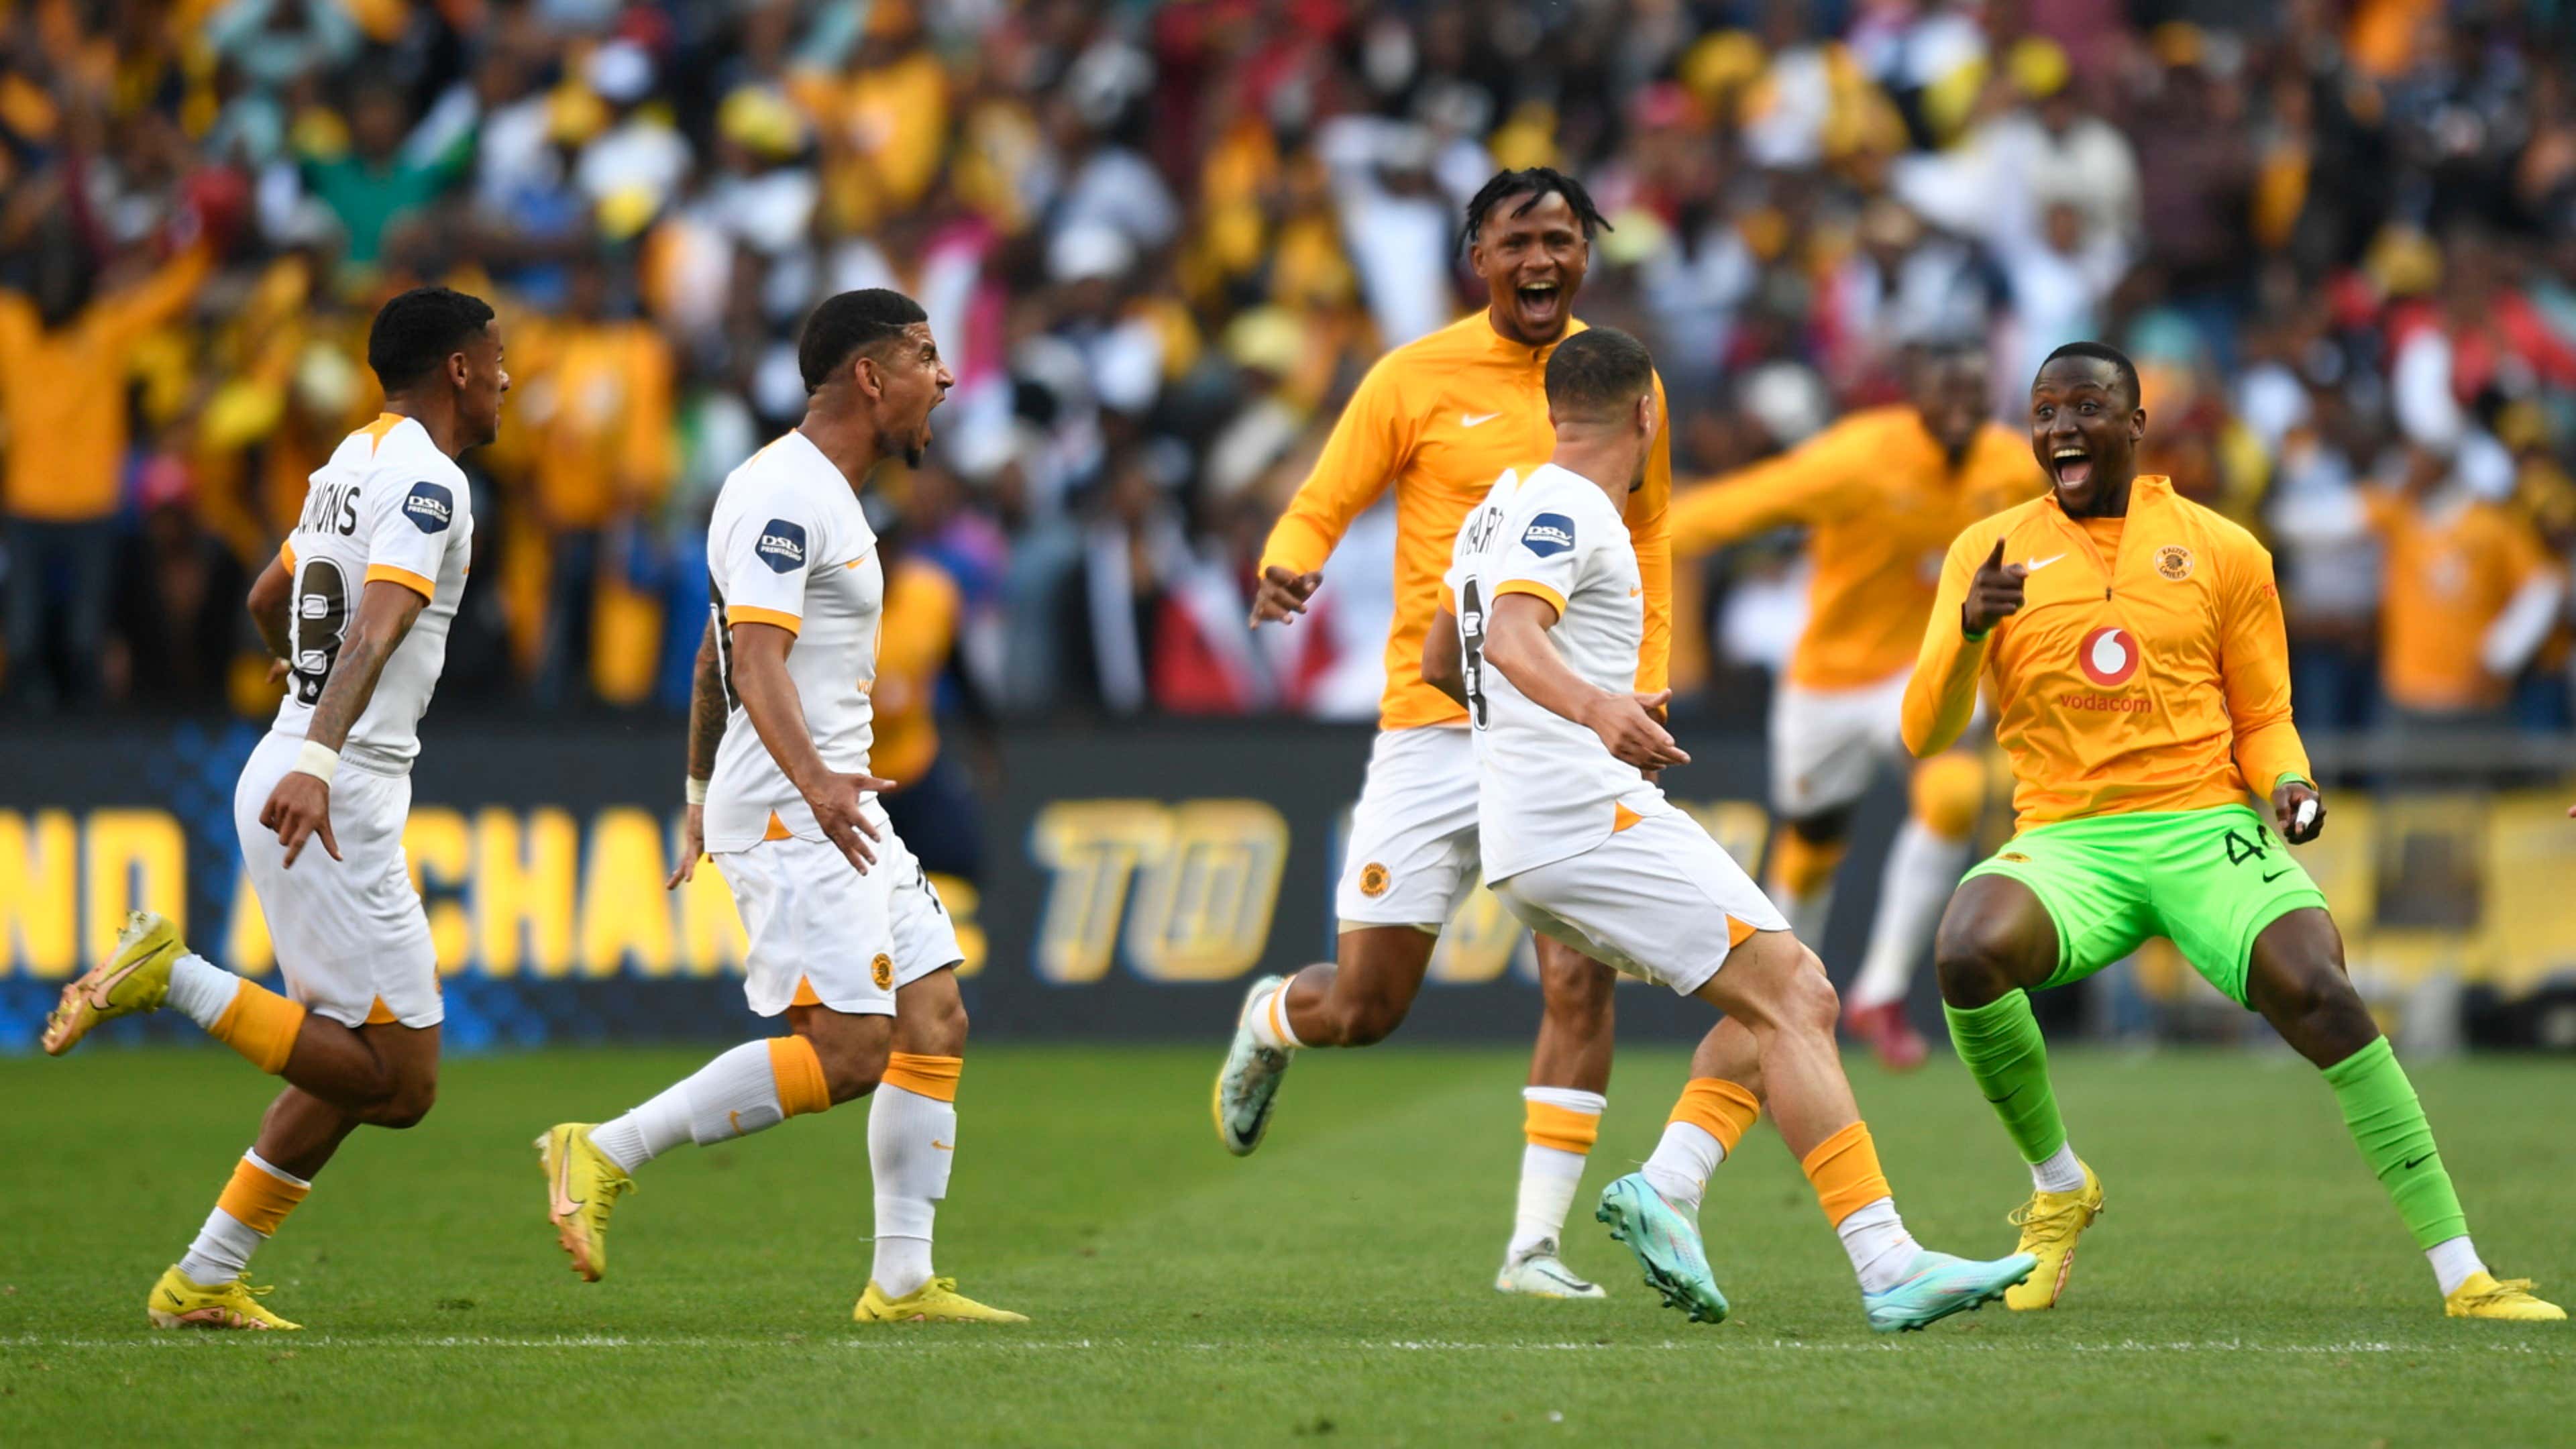 Kaizer Chiefs to replenish squad as new signings fade?